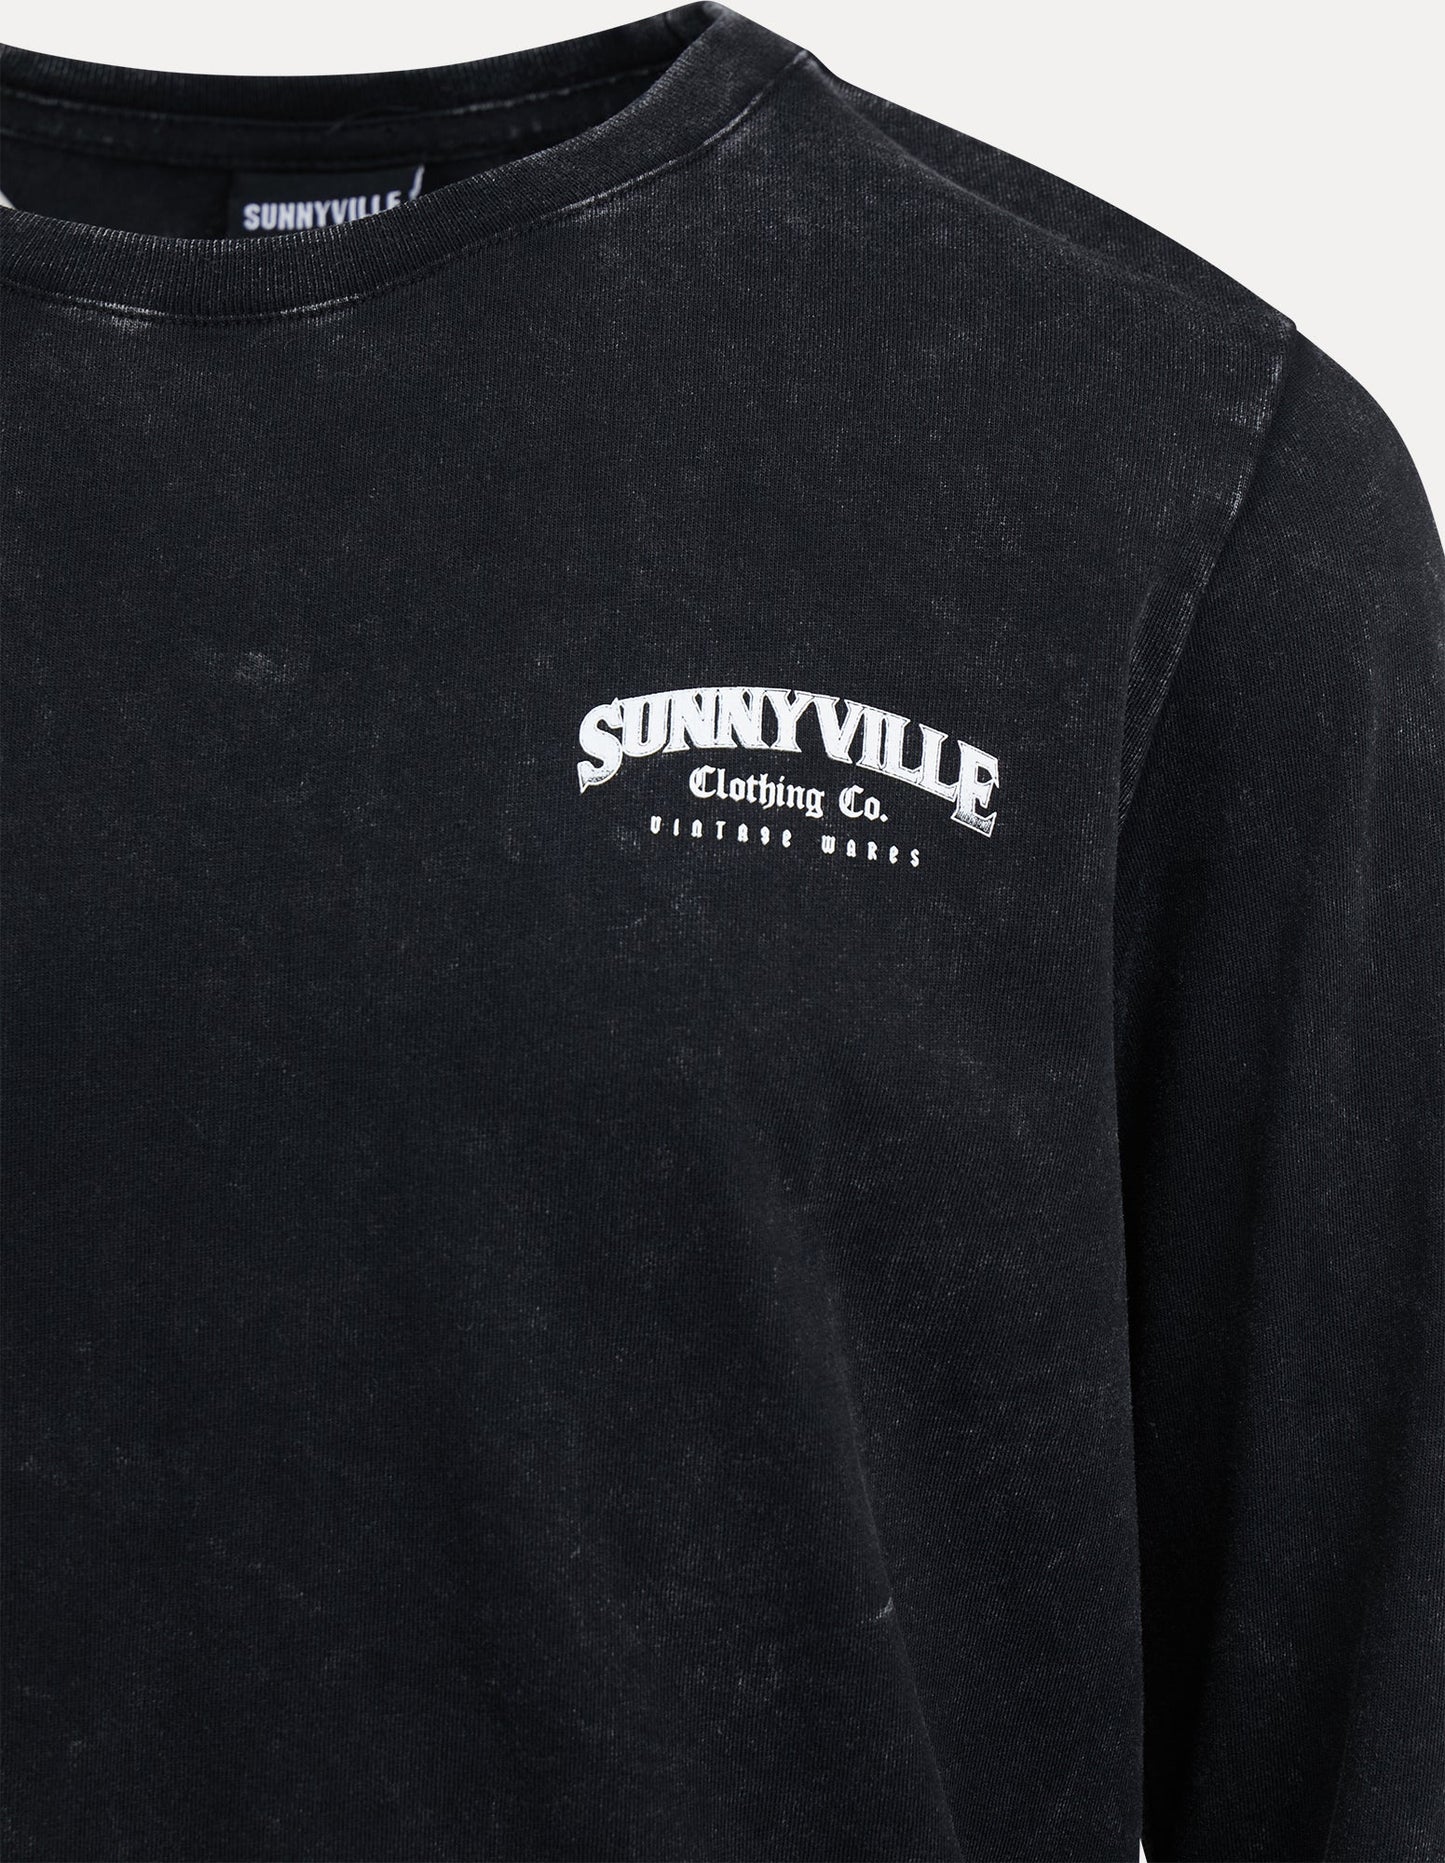 Sunnyville American Eagle L/S Tee - Washed Black